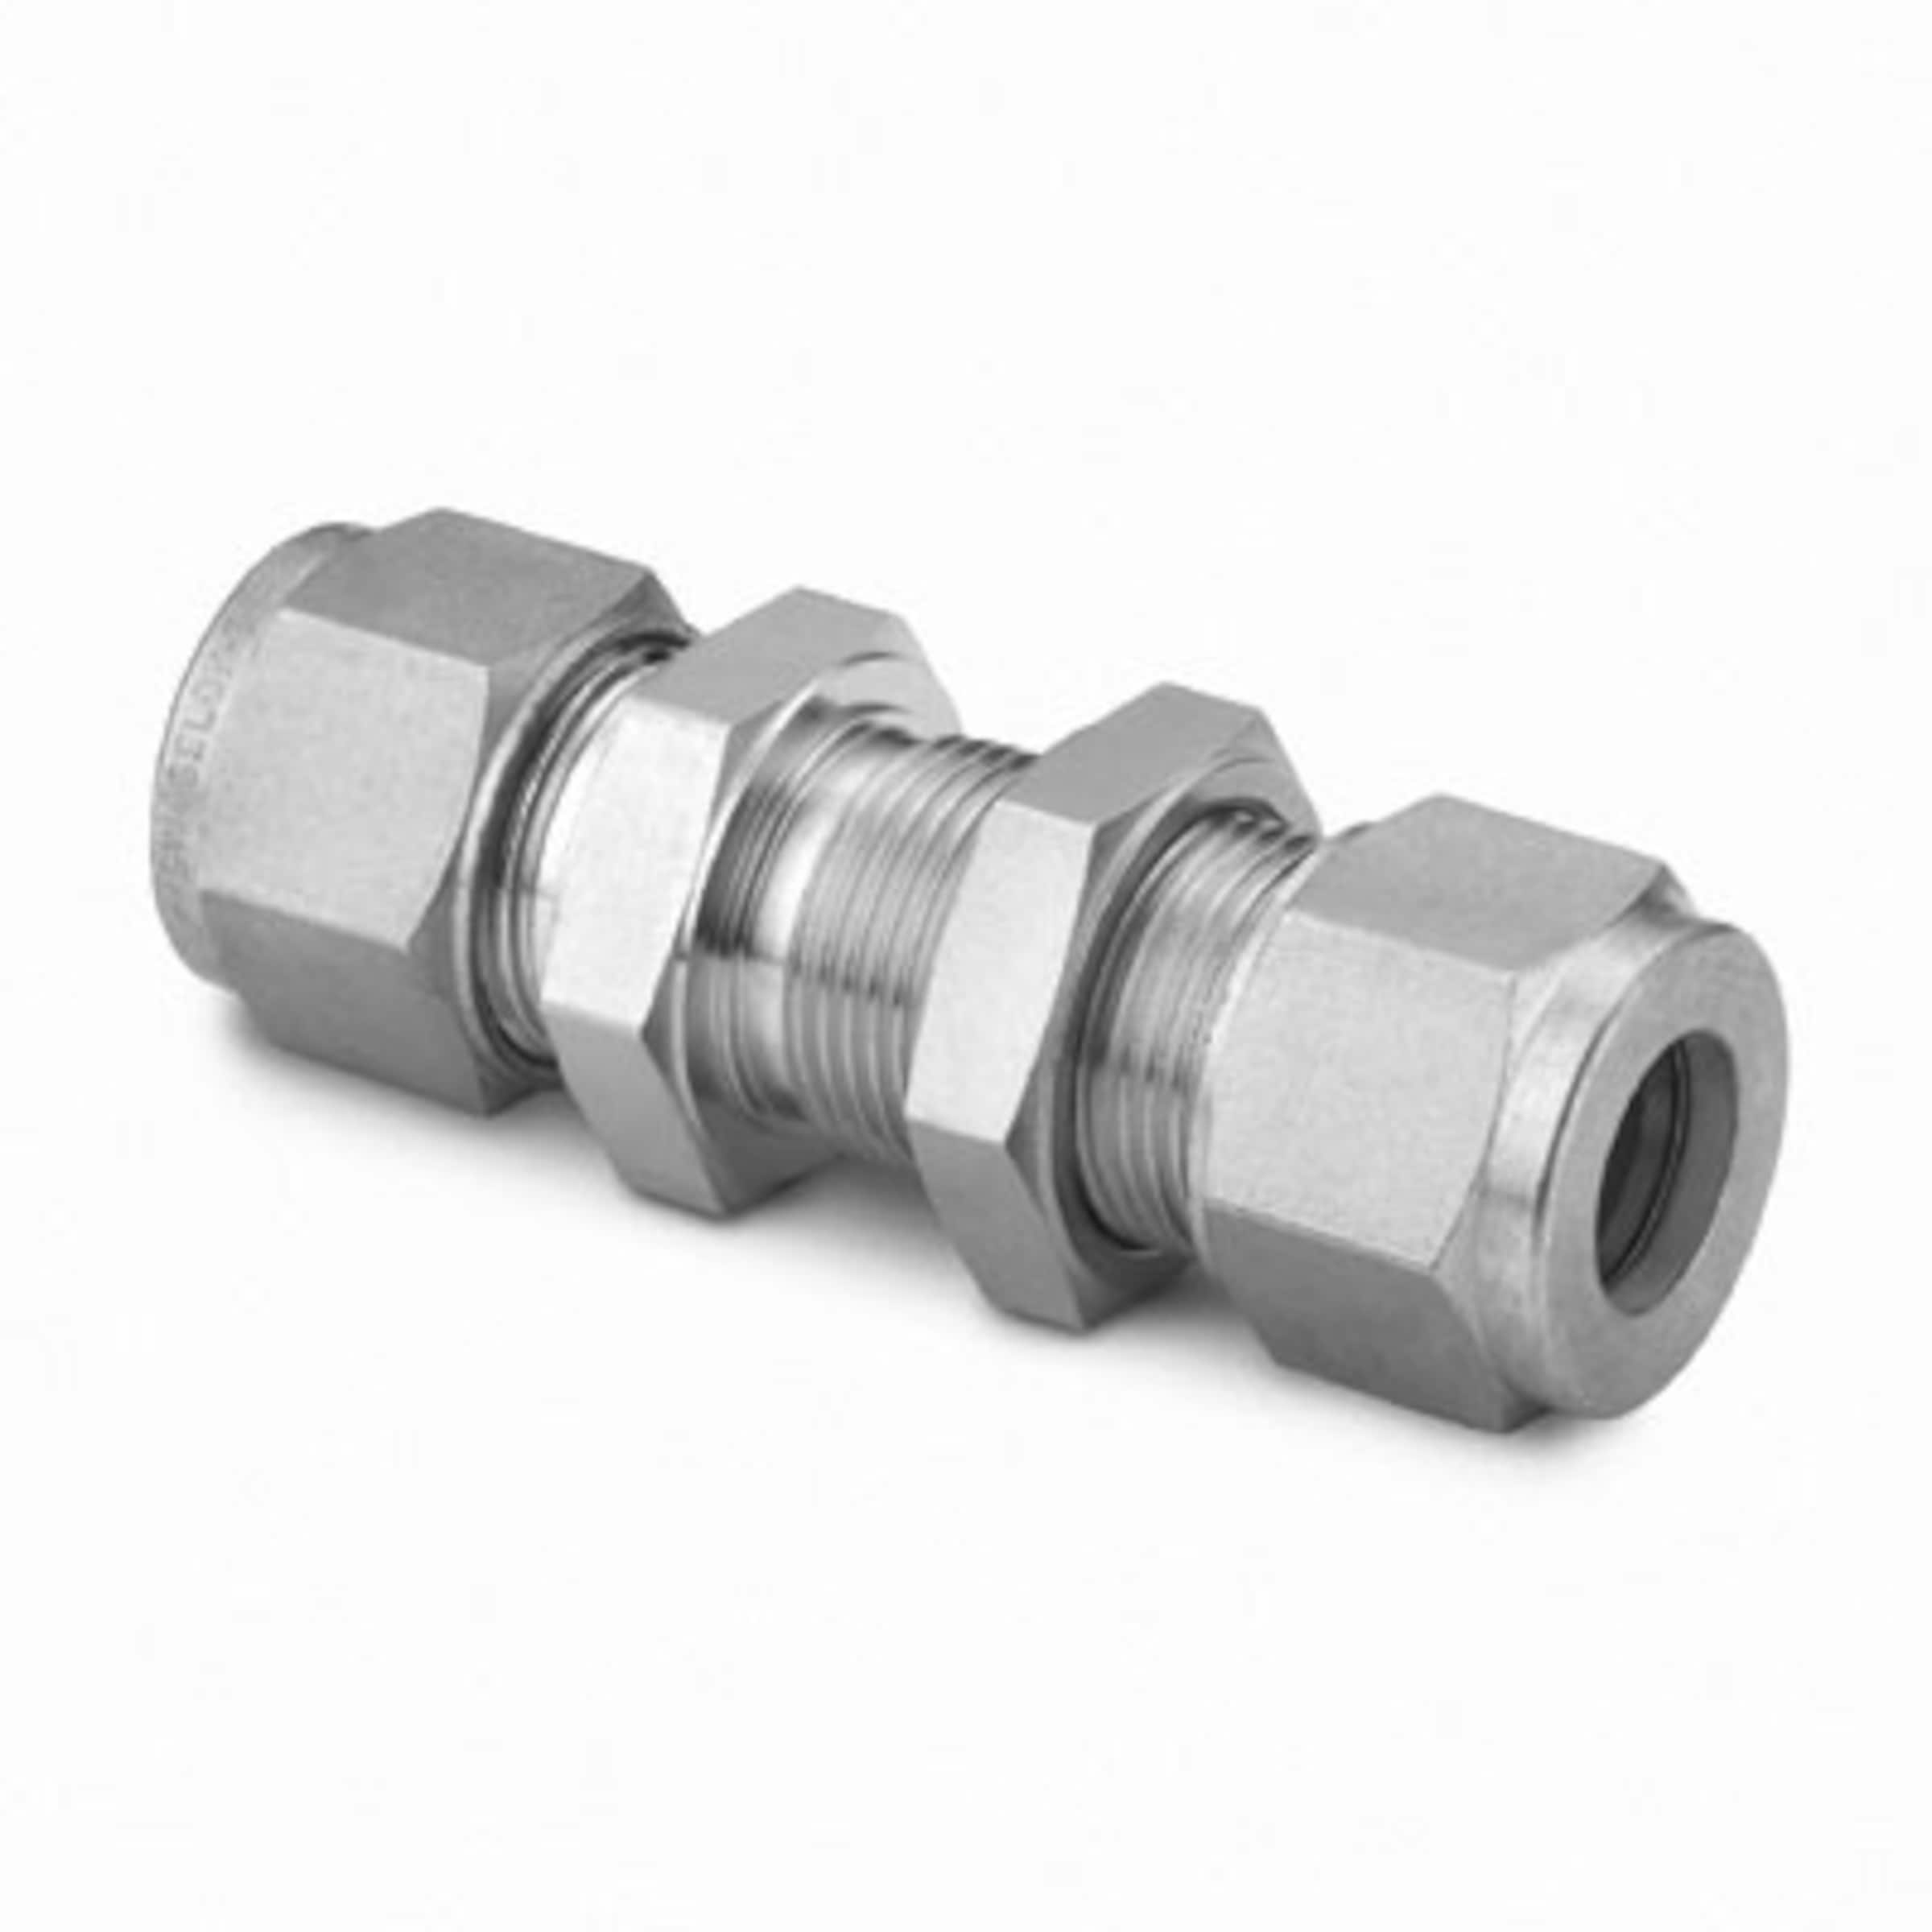 HONJIE Bulkhead Union Push to Connect Tube Fitting 1/4 Tube OD X 1/4 Tube OD Stainless Steel Double Threaded-5 Pcs 